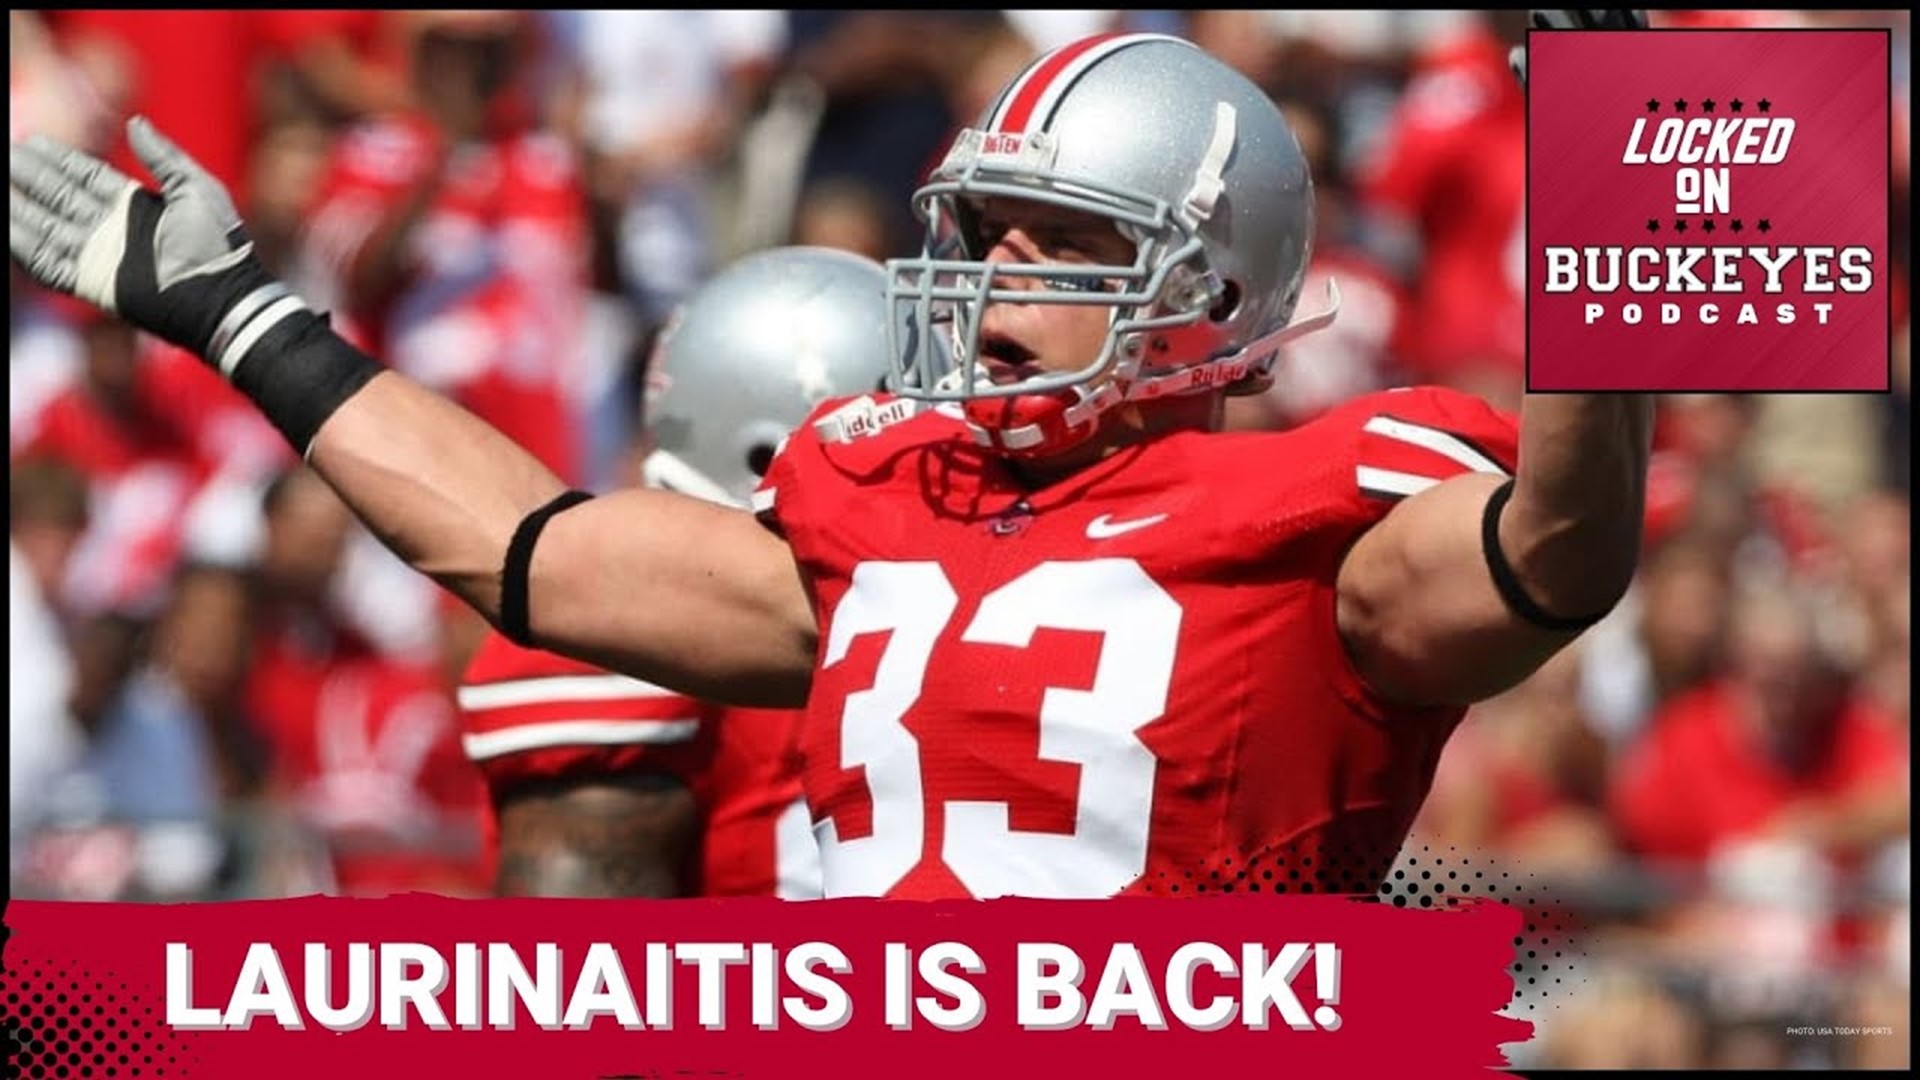 After a year as a grad assistant at Notre Dame, coach Ryan Day decided this was the time to welcome Laurinaitis back to Columbus.